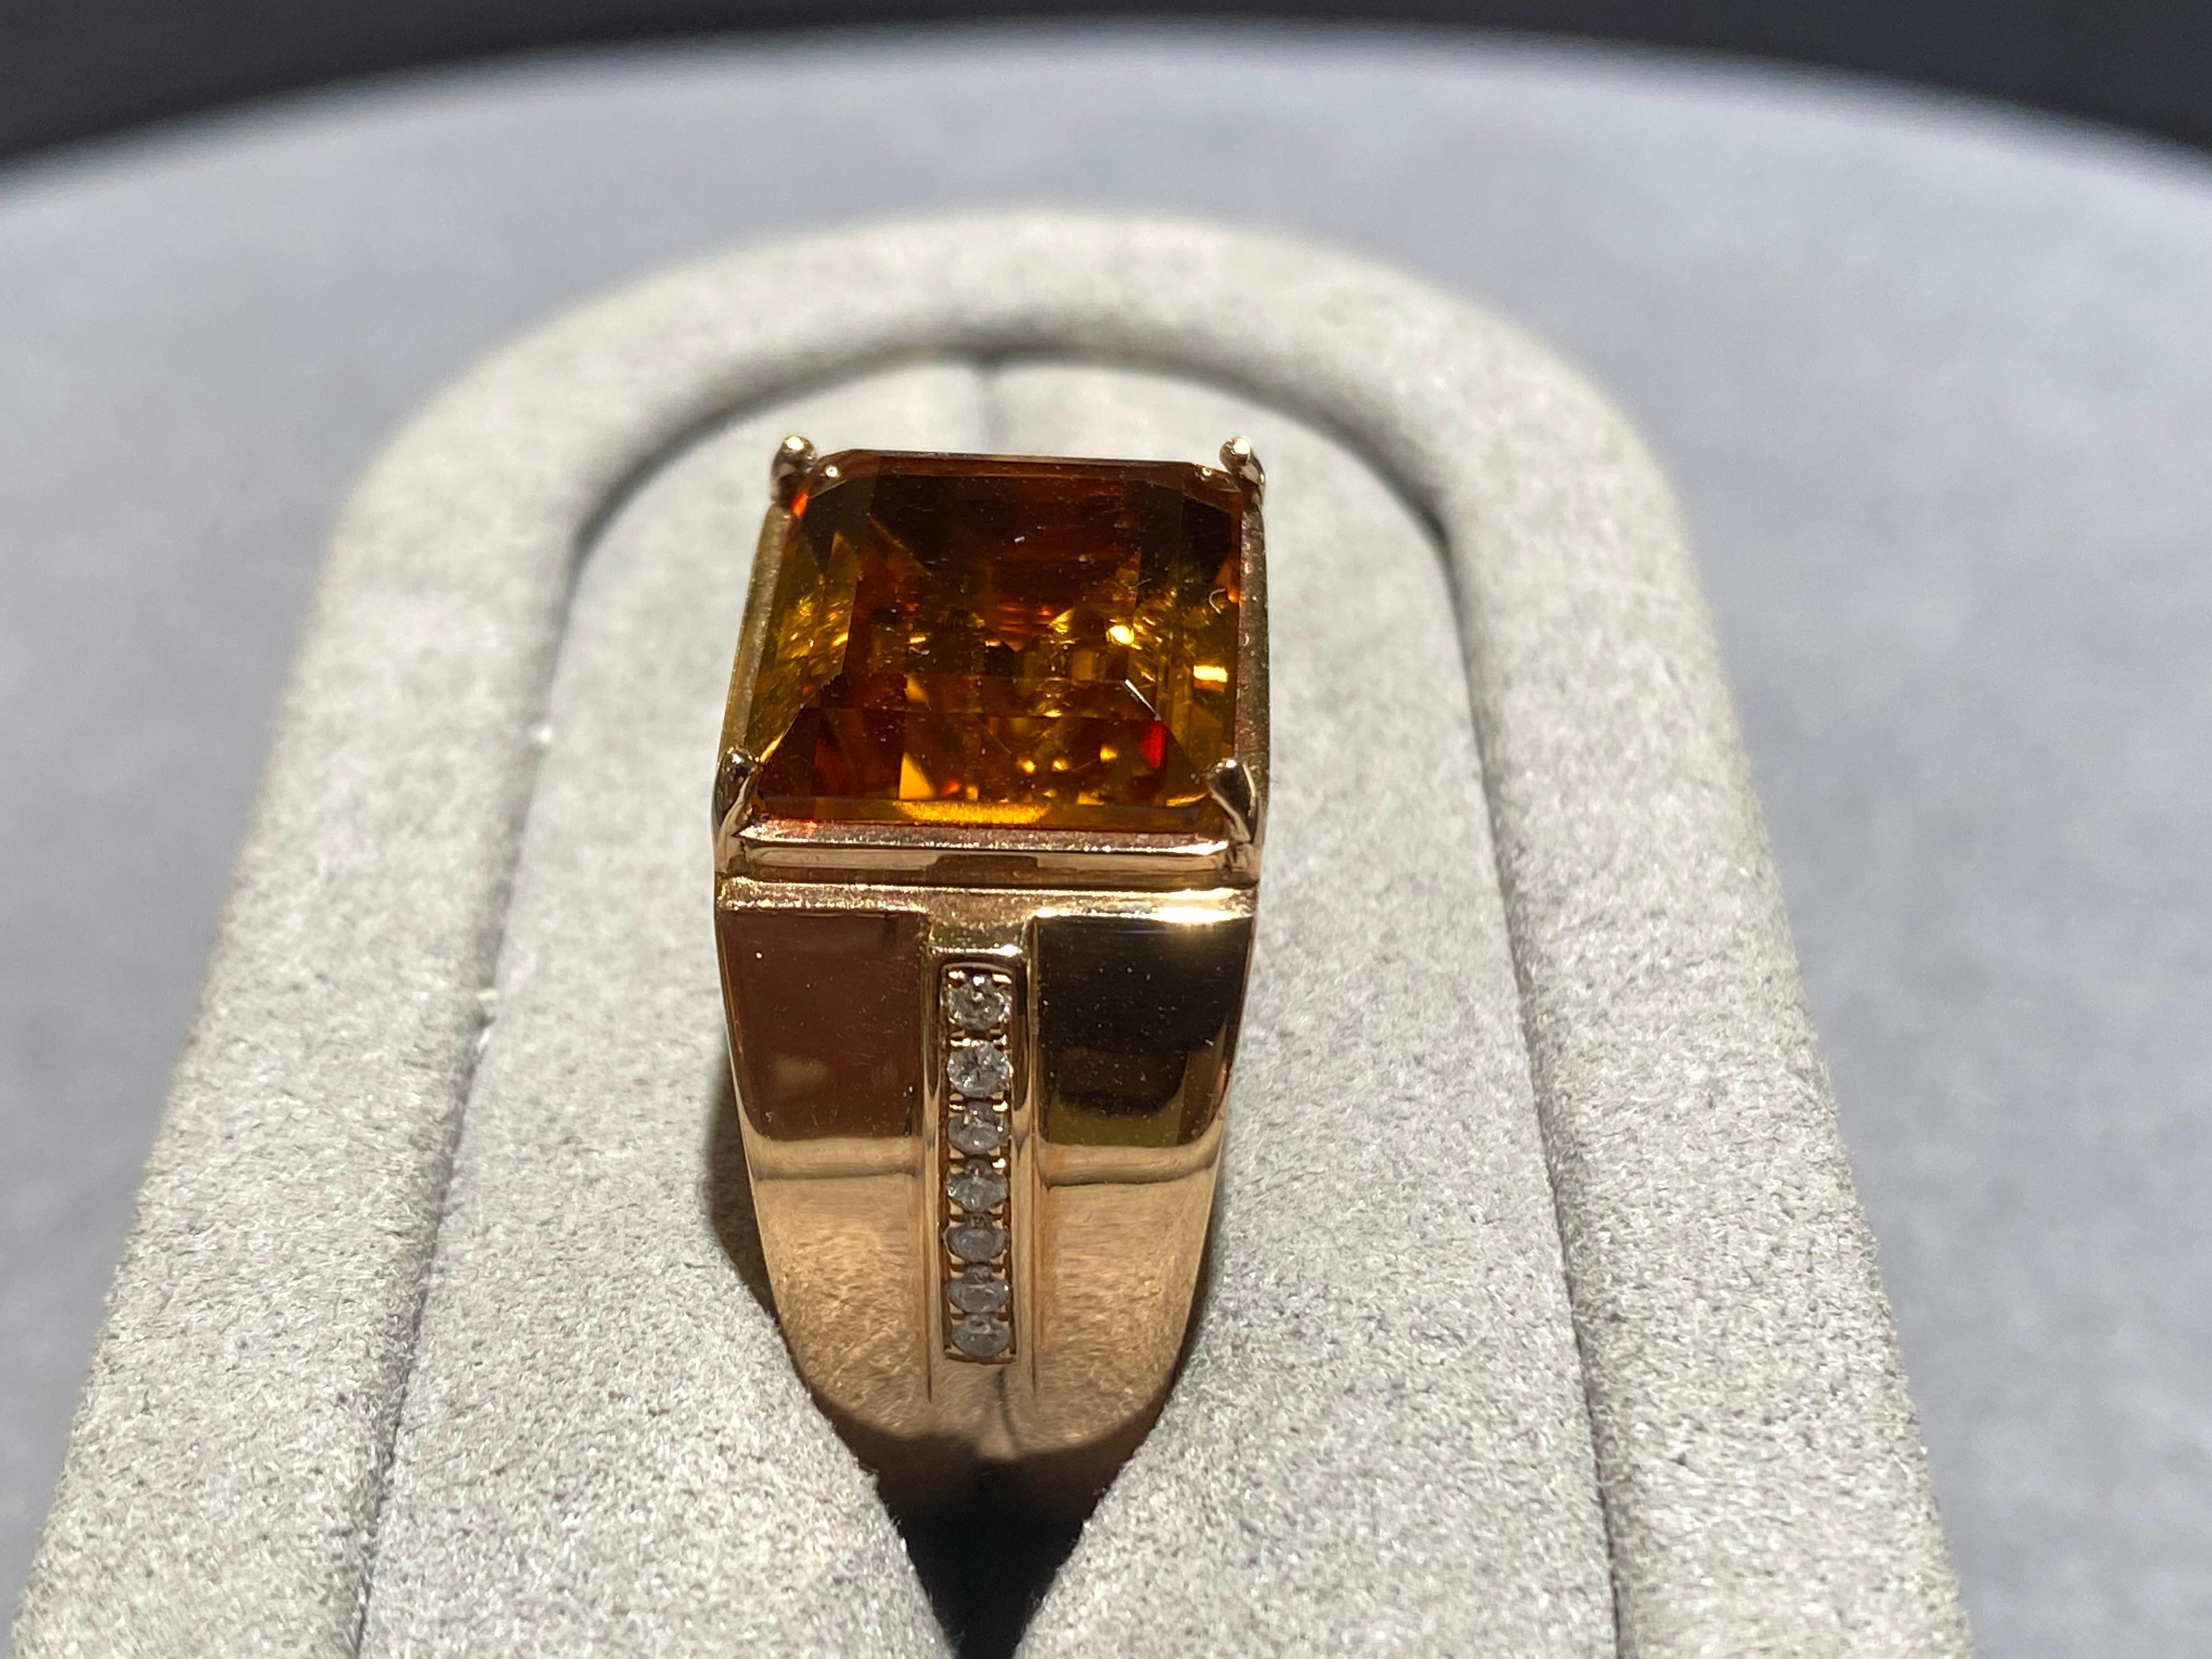 A 7.5 ct Citrine and diamond ring i 18k rose gold. It is a simple design with the main citrine in the middle and 2 lines of diamond pave at 2 side of the ring. 

US Ring size 8.5
